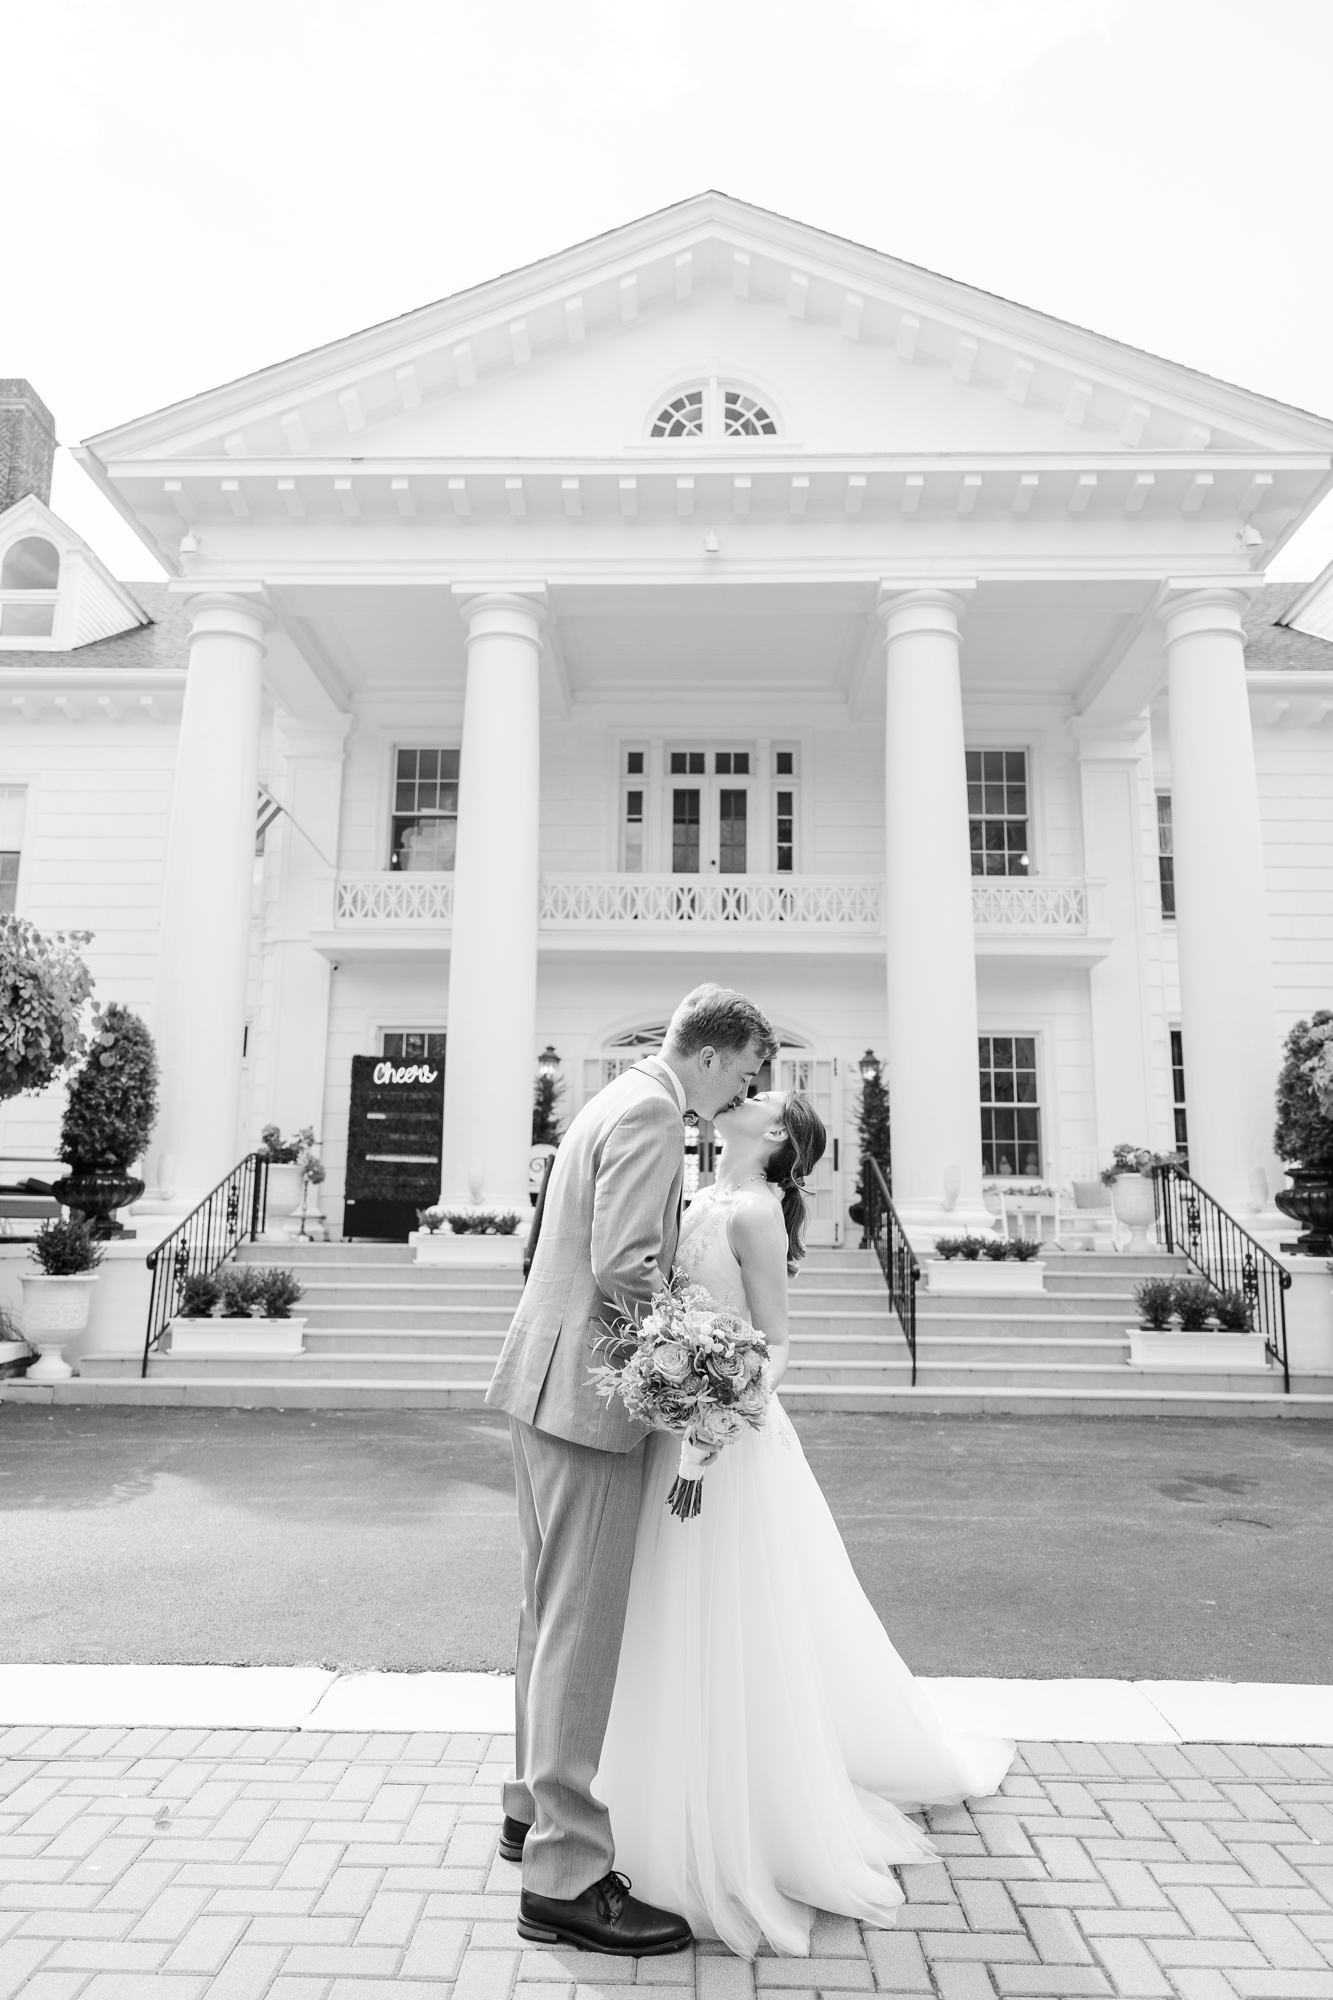 Romantic Wedding at Briarcliff Manor in Westchester County